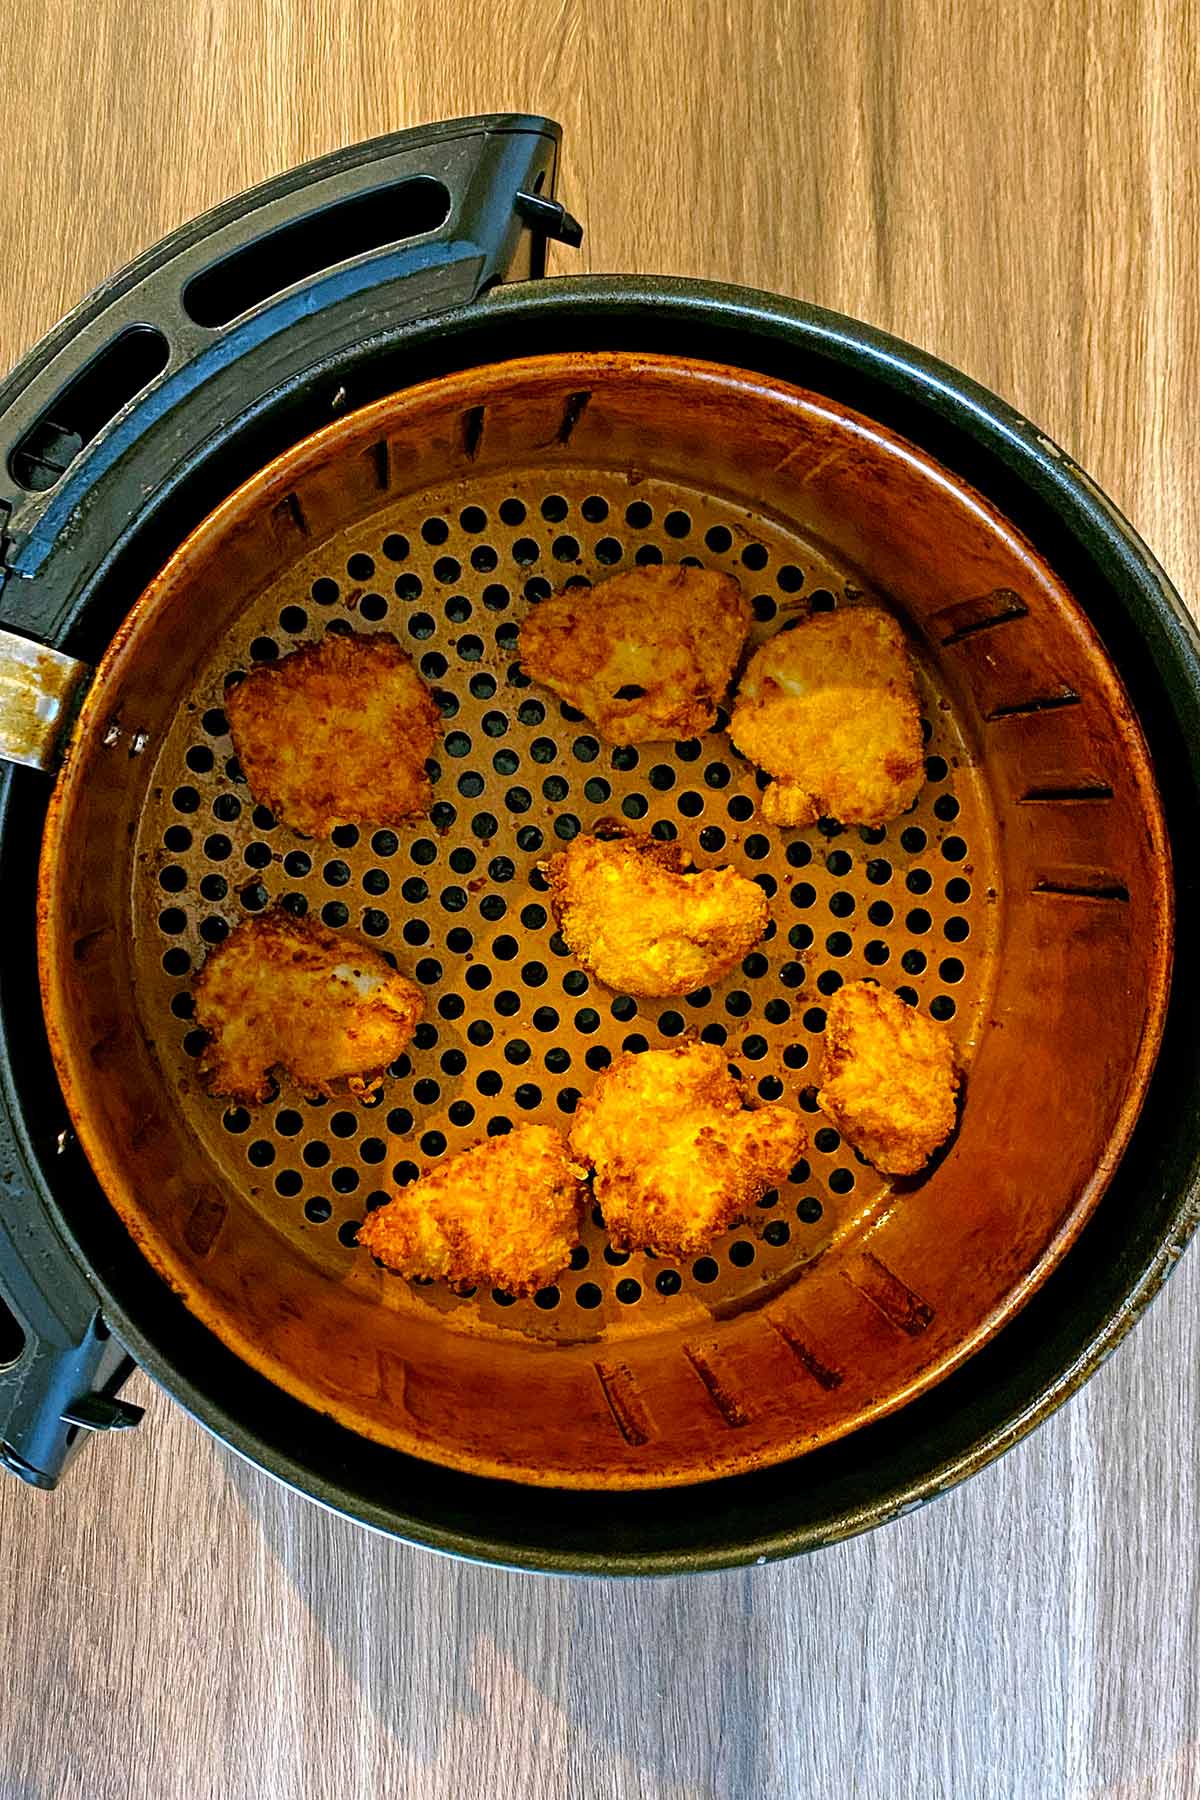 Cooked chicken nuggets in the air fryer.